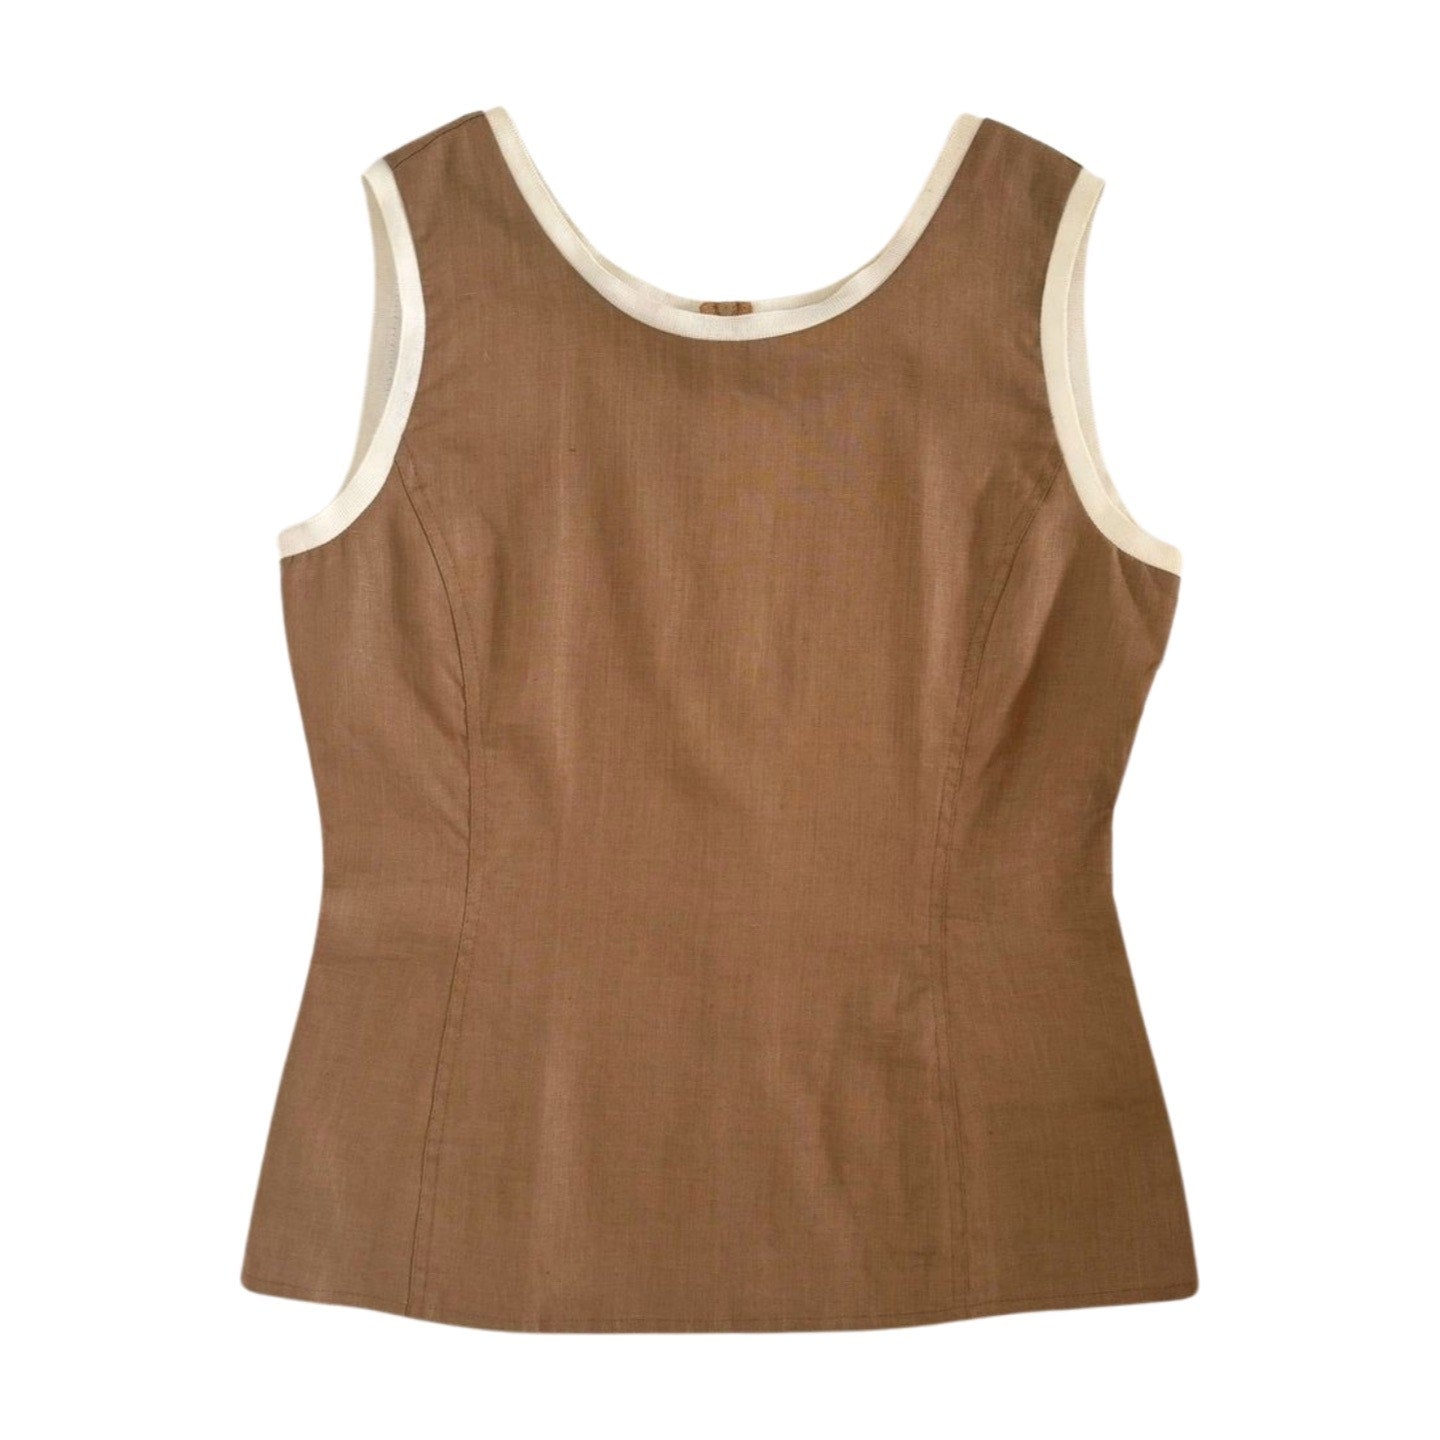 A Valentino Miss V Linen Tank Top with white trim around the neckline and armholes. The top has a fitted silhouette and is made from solid, textured 100% linen. The design is simple and elegant, reminiscent of vintage Valentino, without any visible buttons, zippers, or patterns.